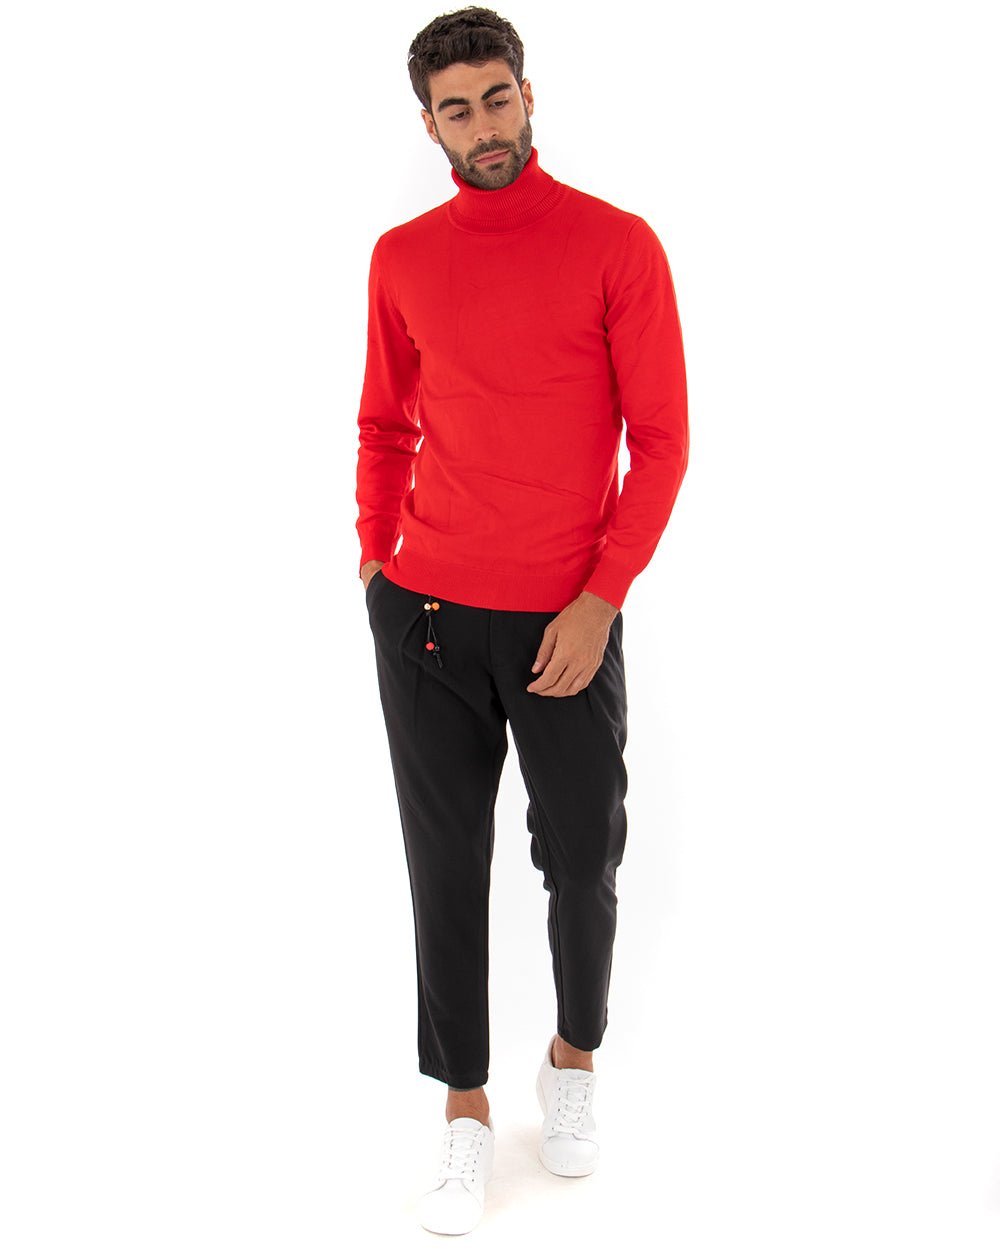 Men's Sweater Long Sleeves Elastic High Neck Solid Color Red GIOSAL M2546A